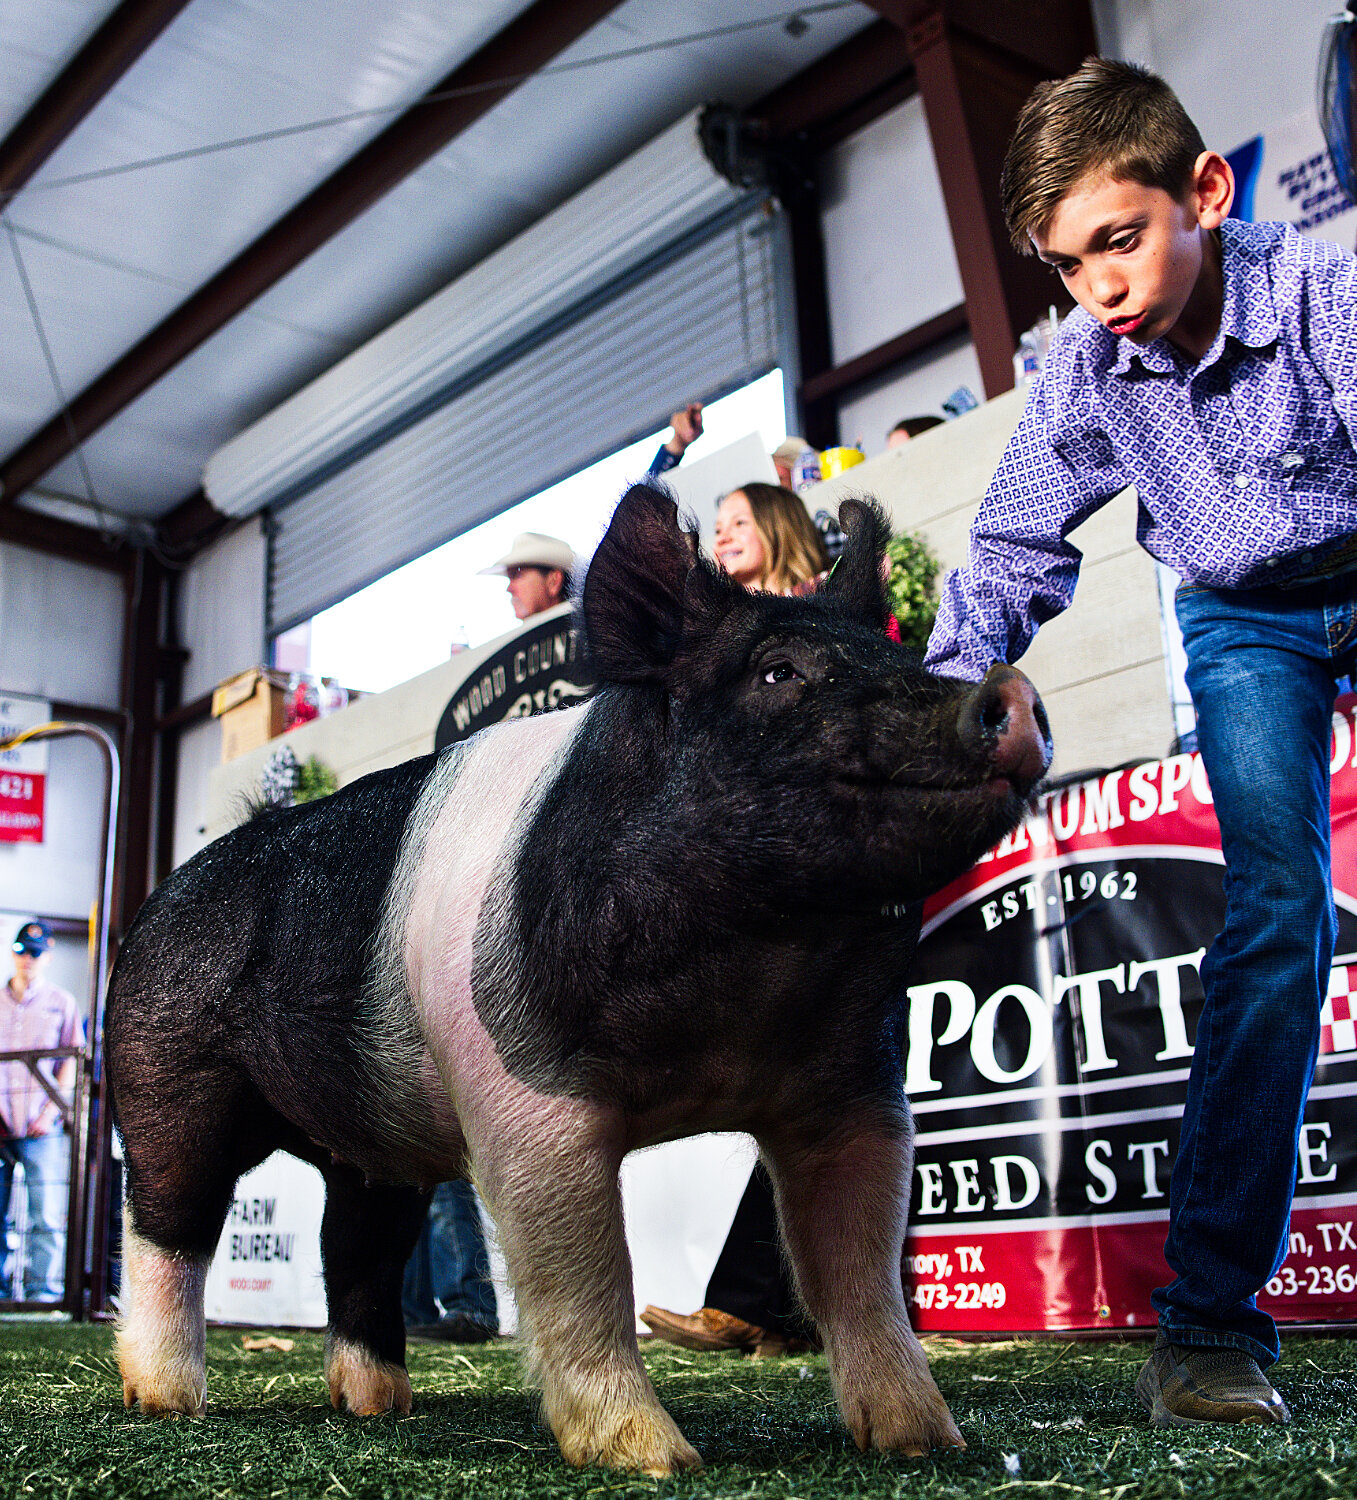 Luke Wernecke of Mineola FFA received $4,100 for his reserve champion hog. [see some more sale images]